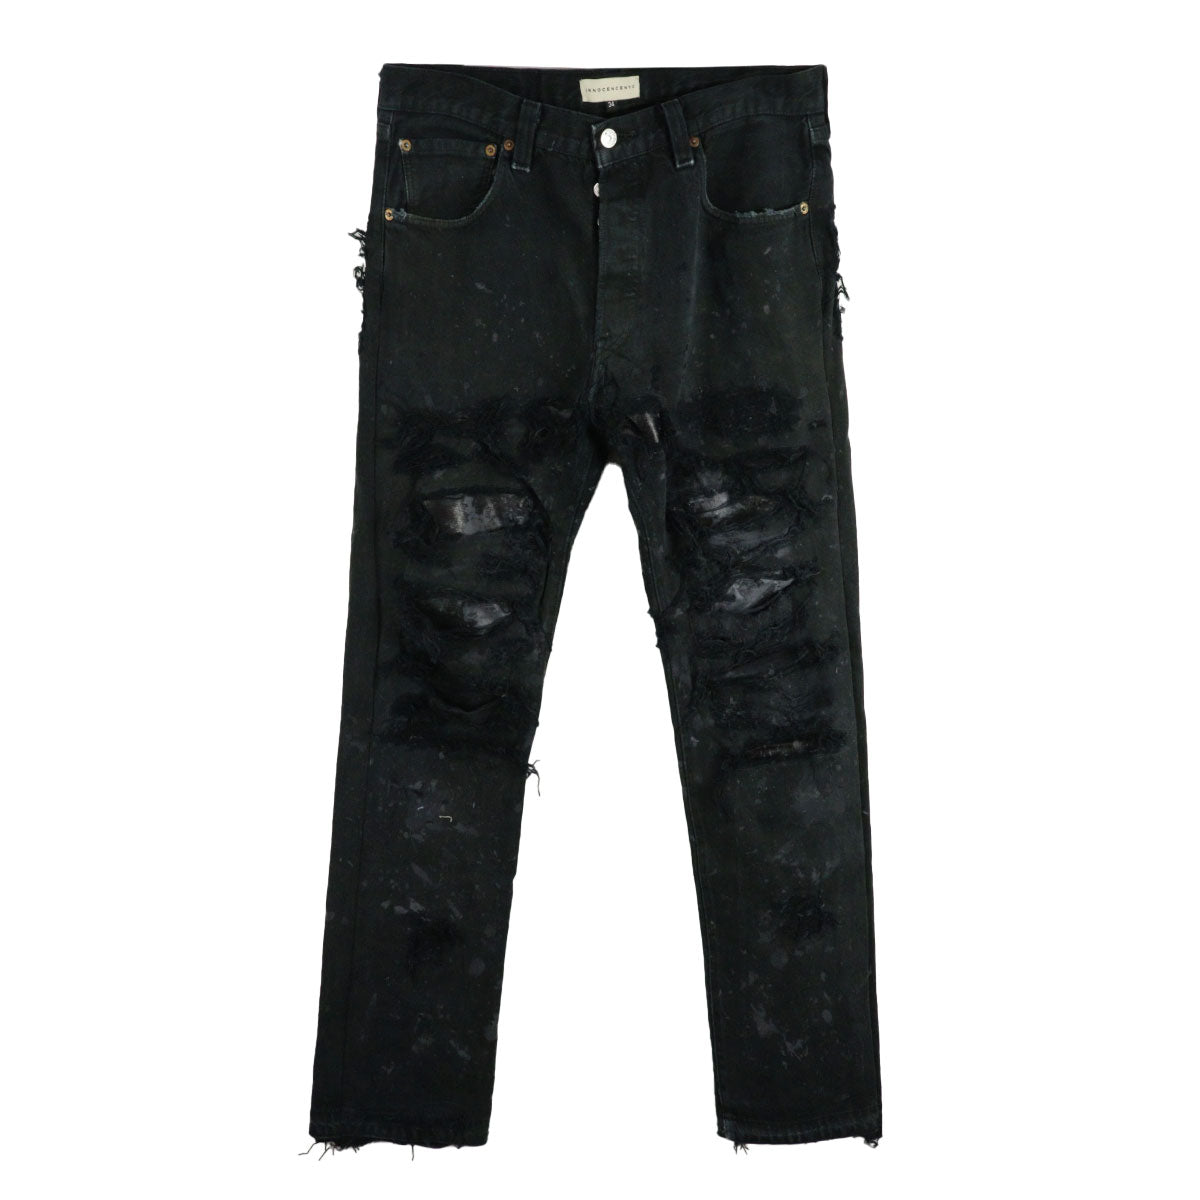 Destroy Leather Denim Pants 34b | Why are you here?